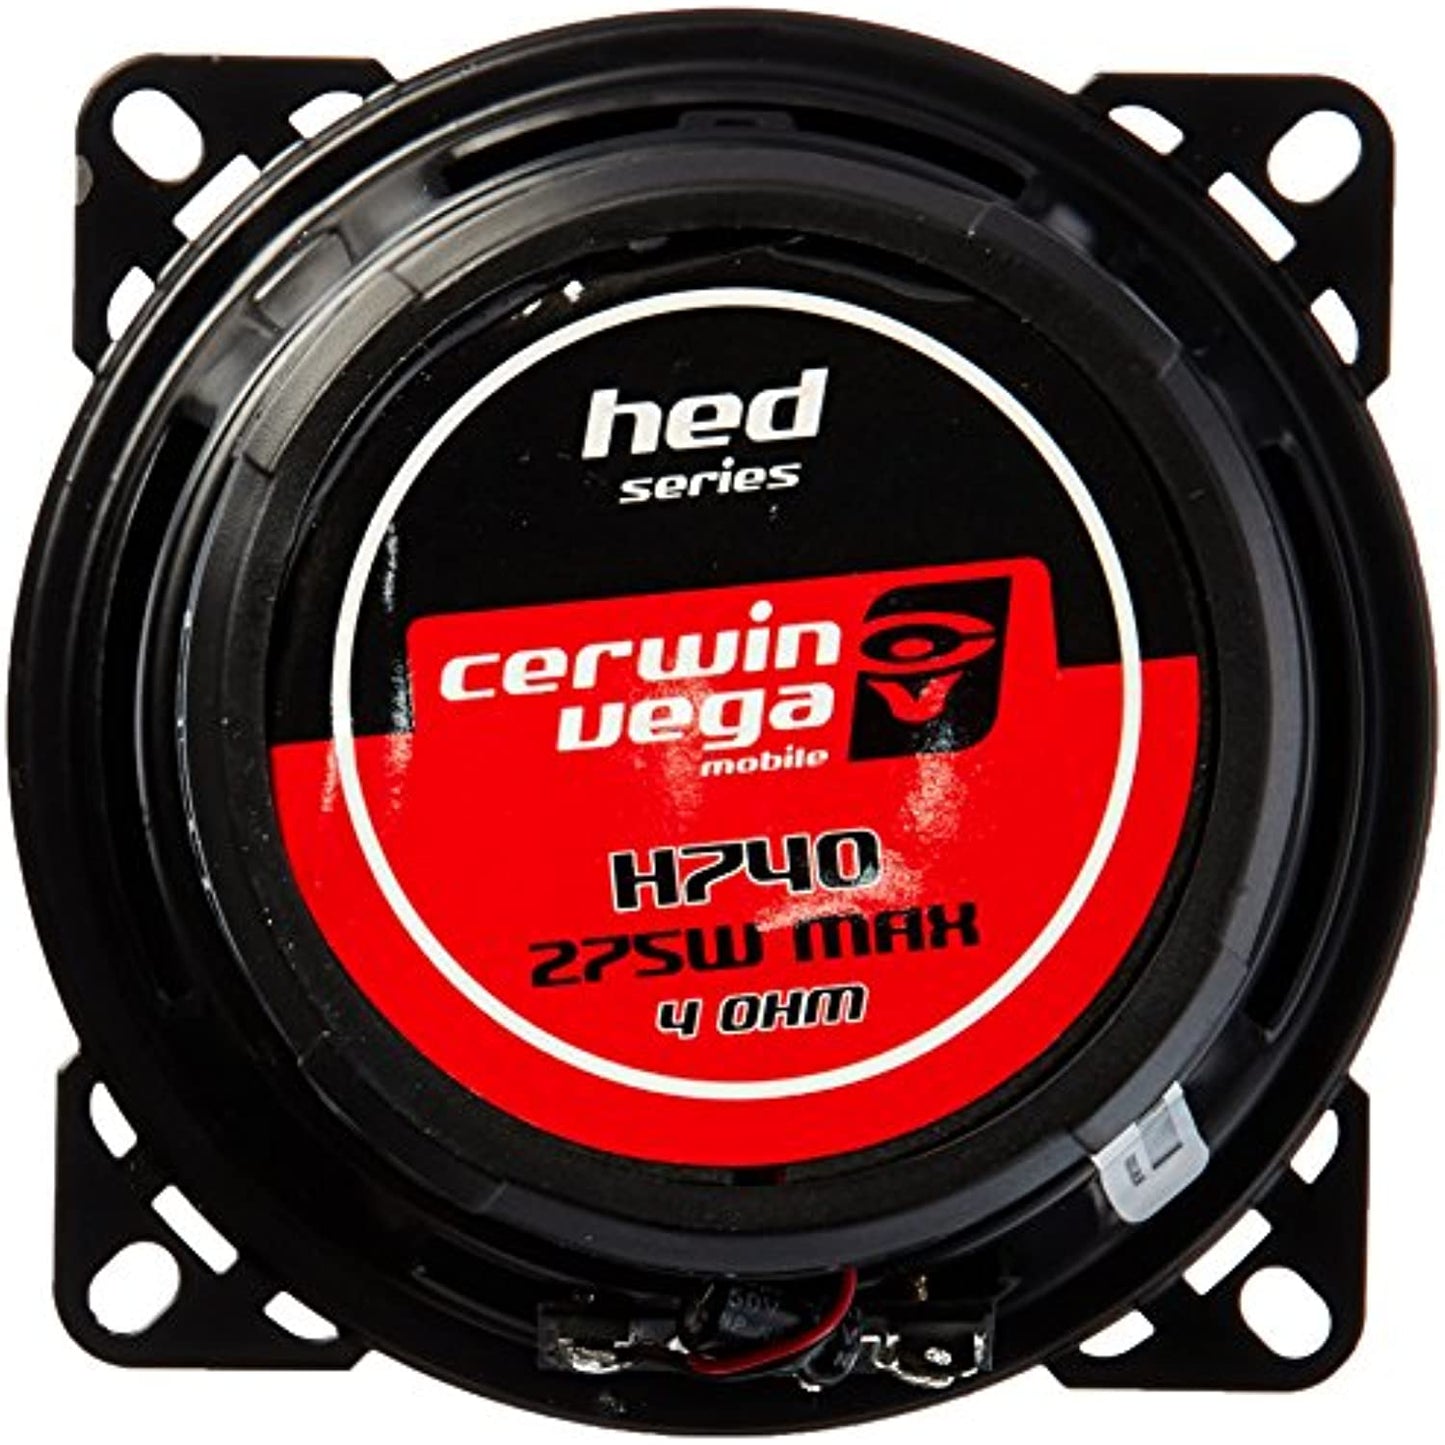 CERWIN-VEGA H740 HED(R) Series 2-Way Coaxial Speakers (4", 275 Watts max), Black